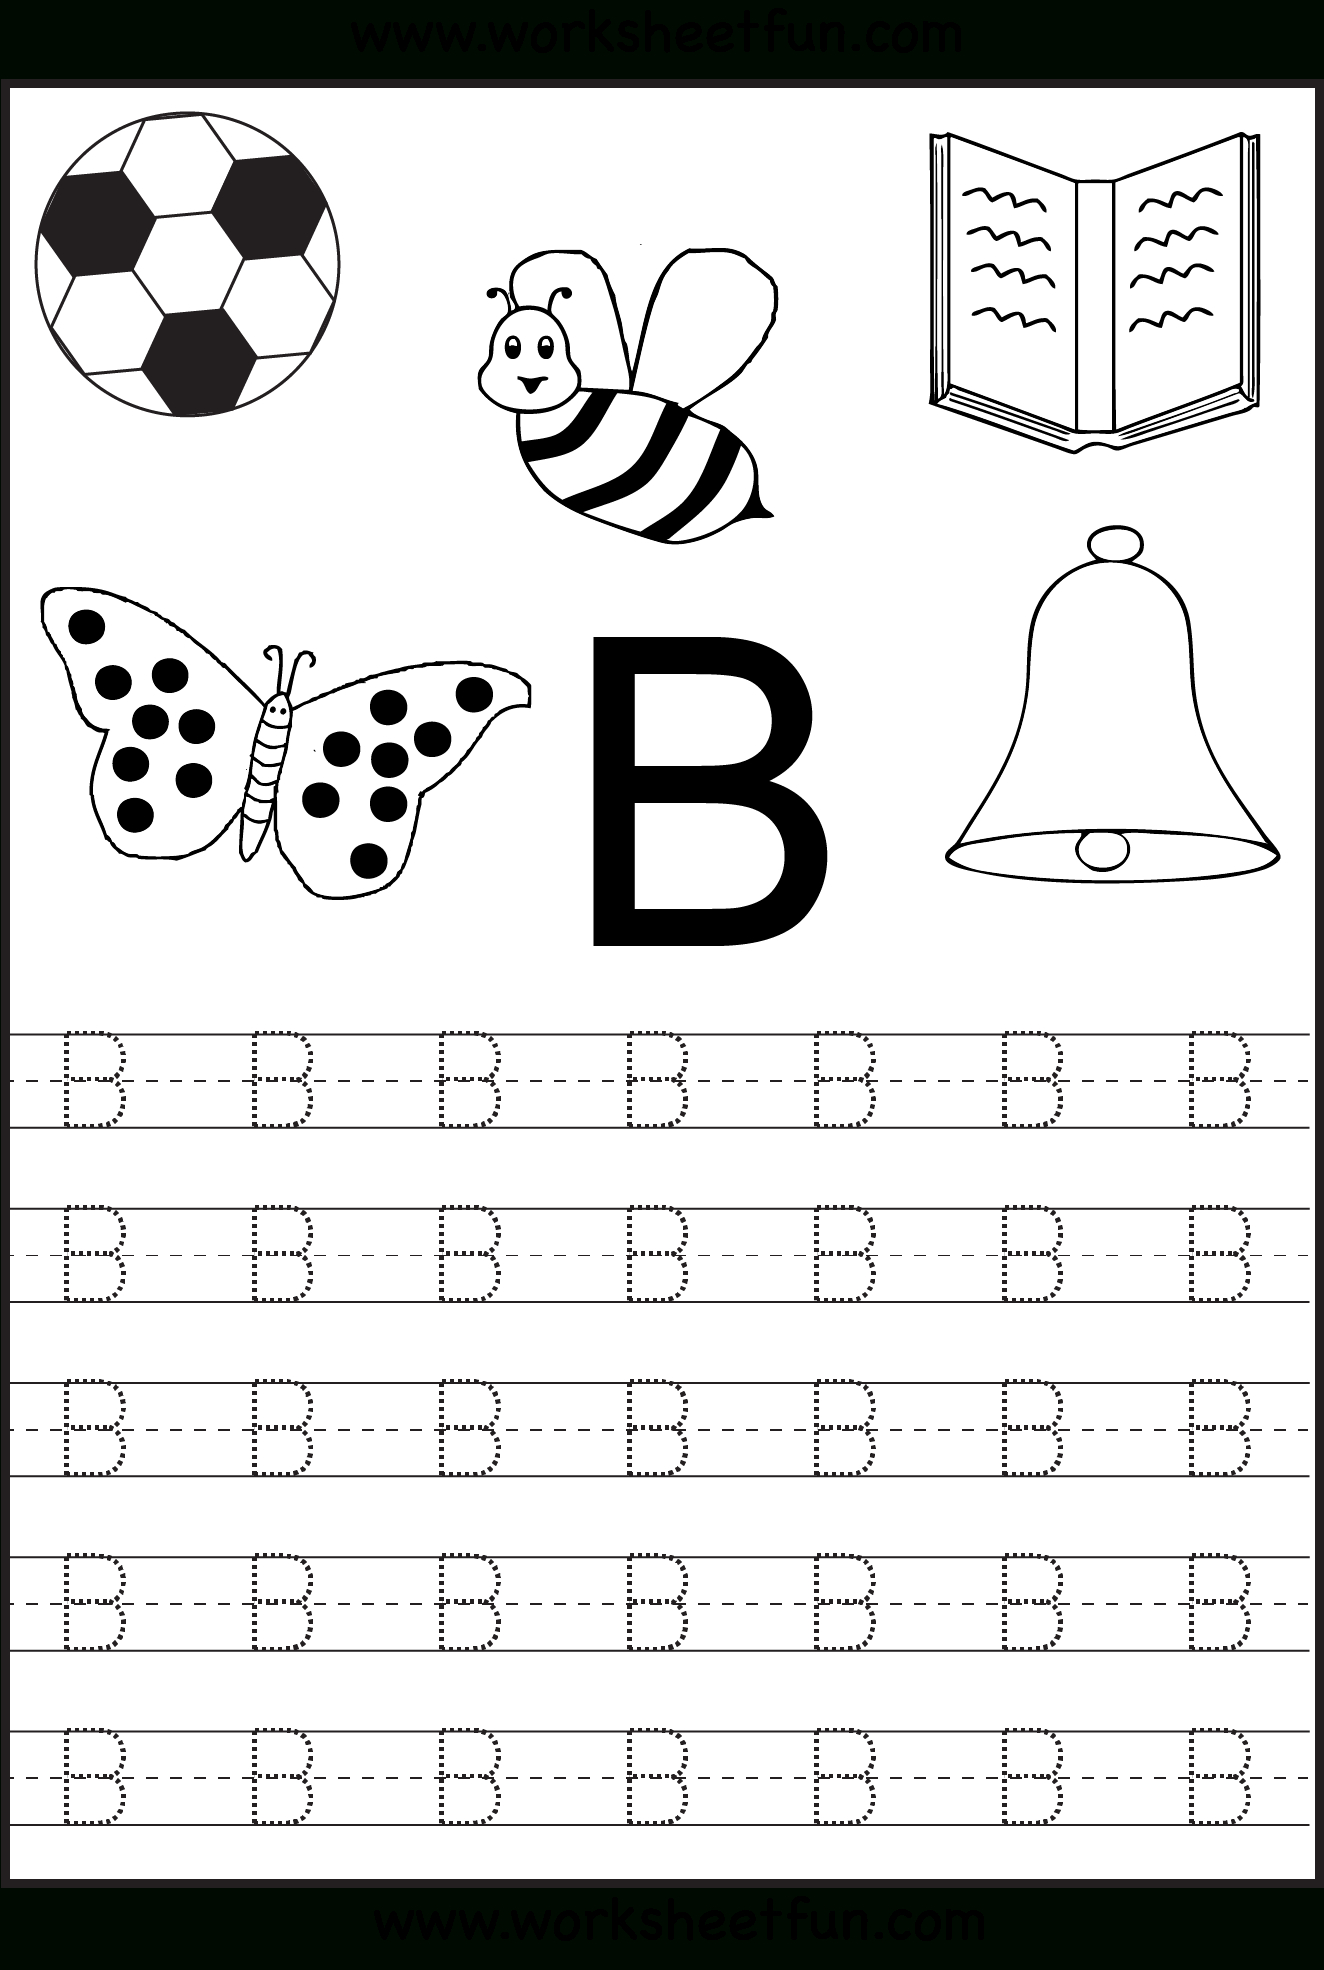 Free Printable Letter Tracing Worksheets For Kindergarten – 26 | Printable Worksheets For Preschoolers The Alphabets